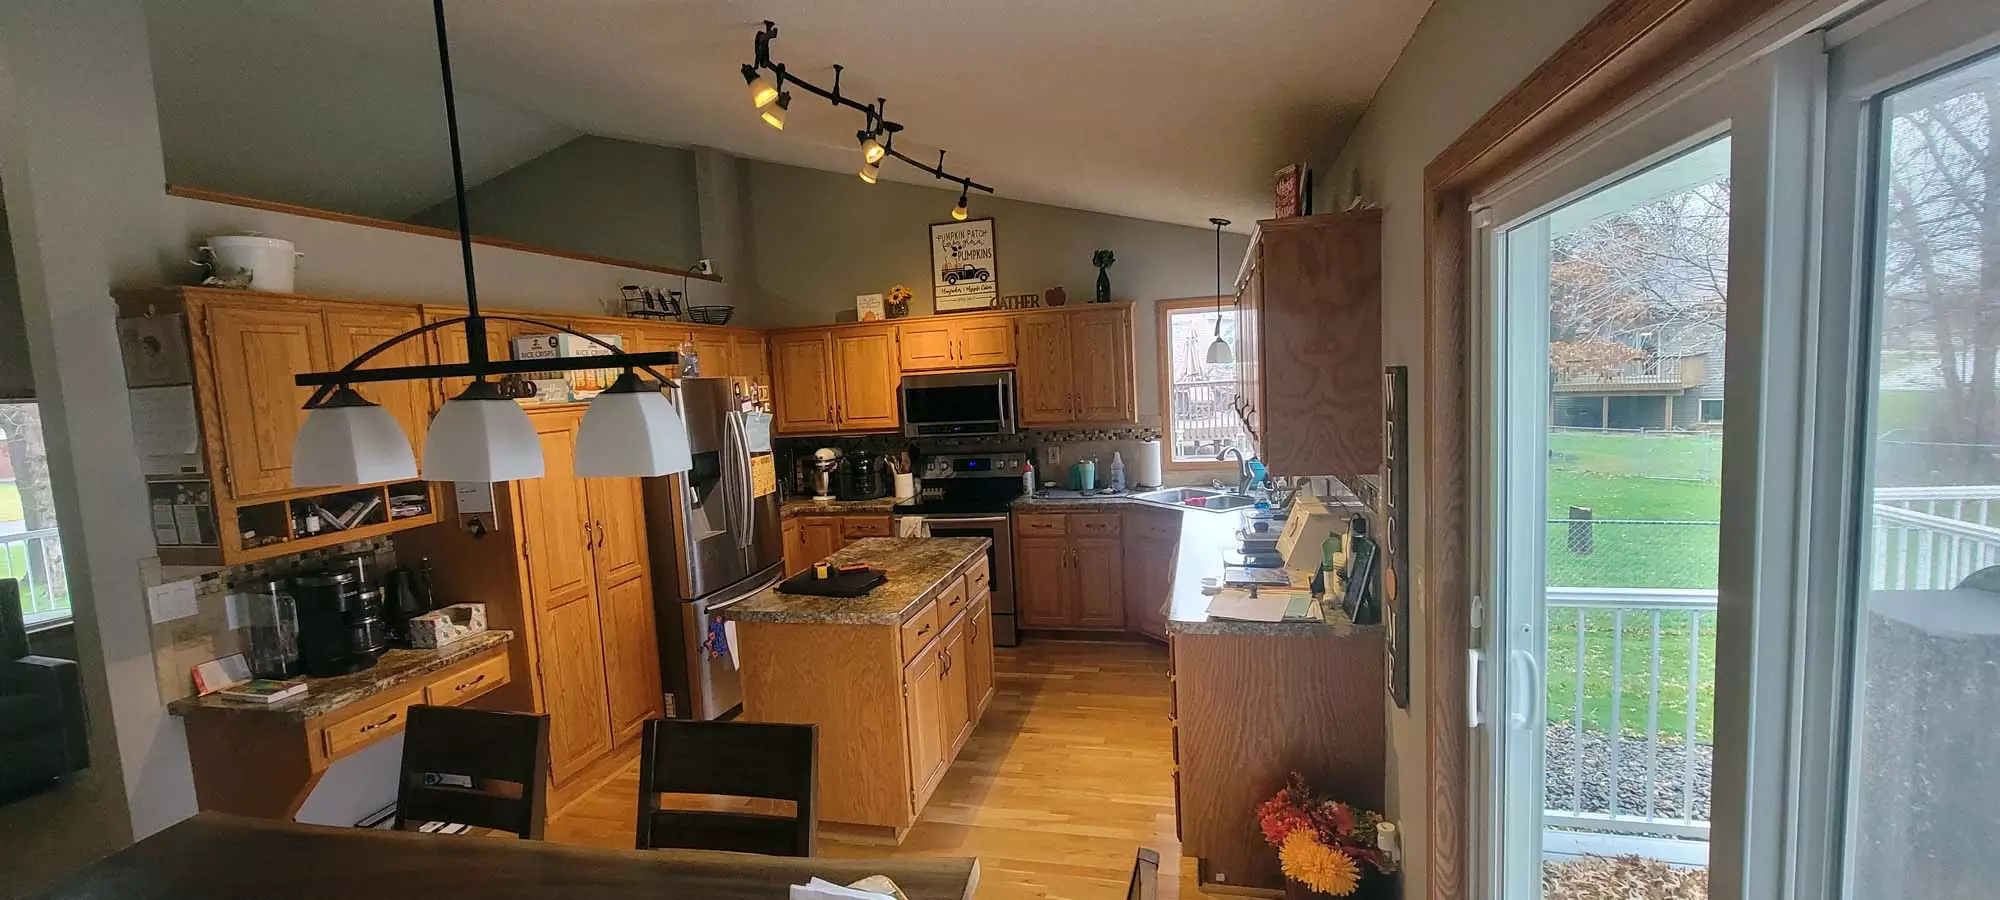 Andover Home camped kitchen with small island before remodel to create large Kitchen w/ Walk-In-Pantry